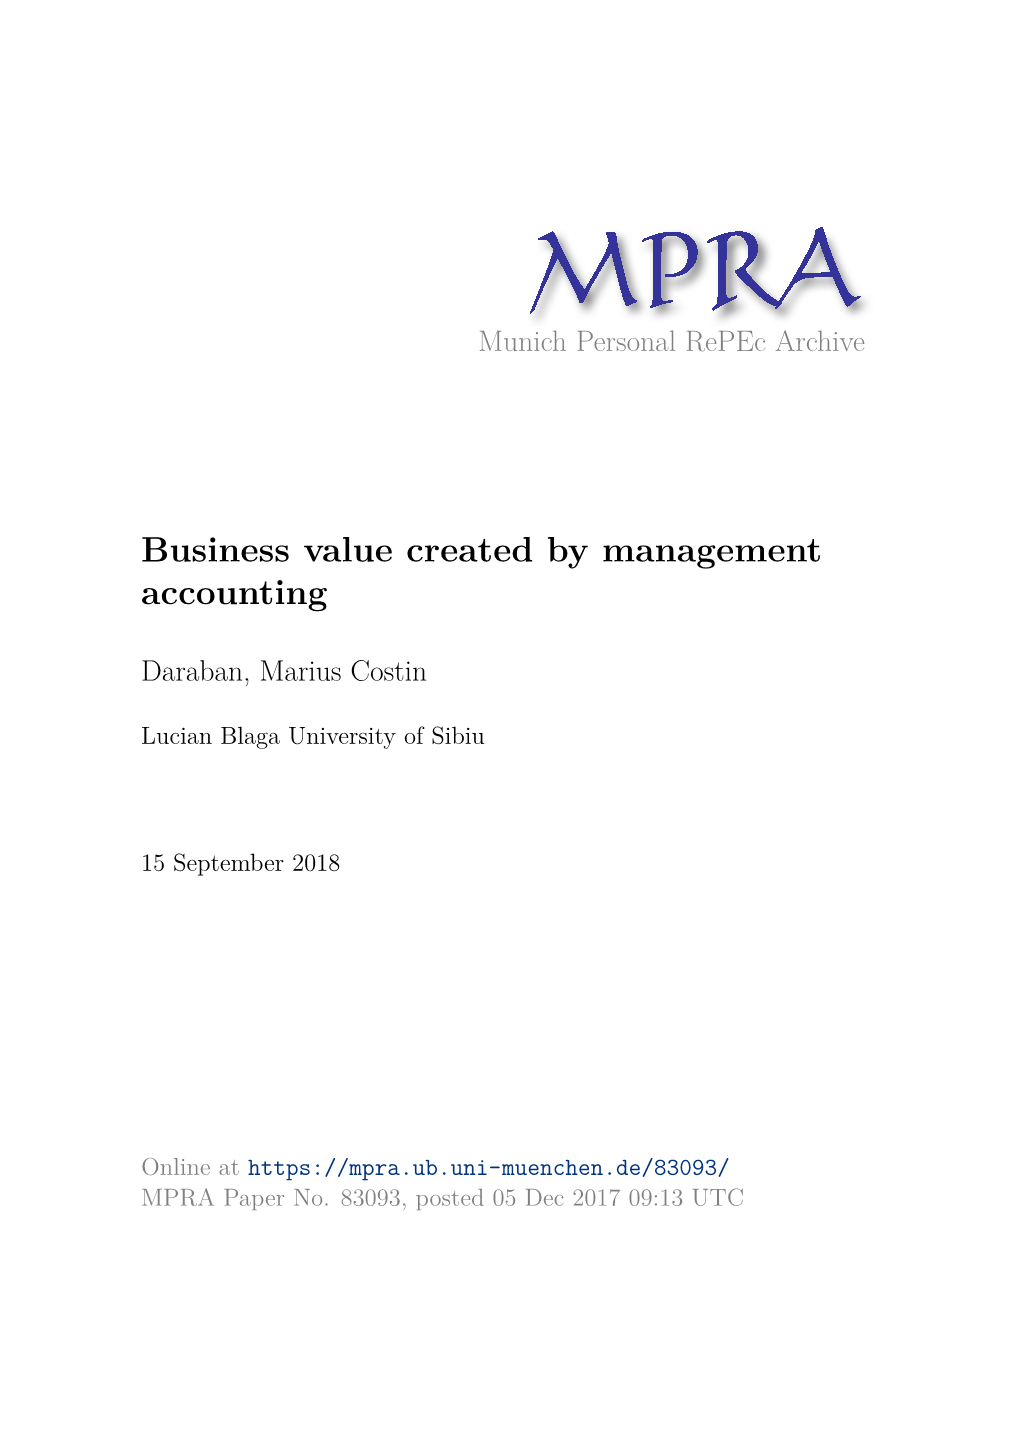 Business Value Created by Management Accounting